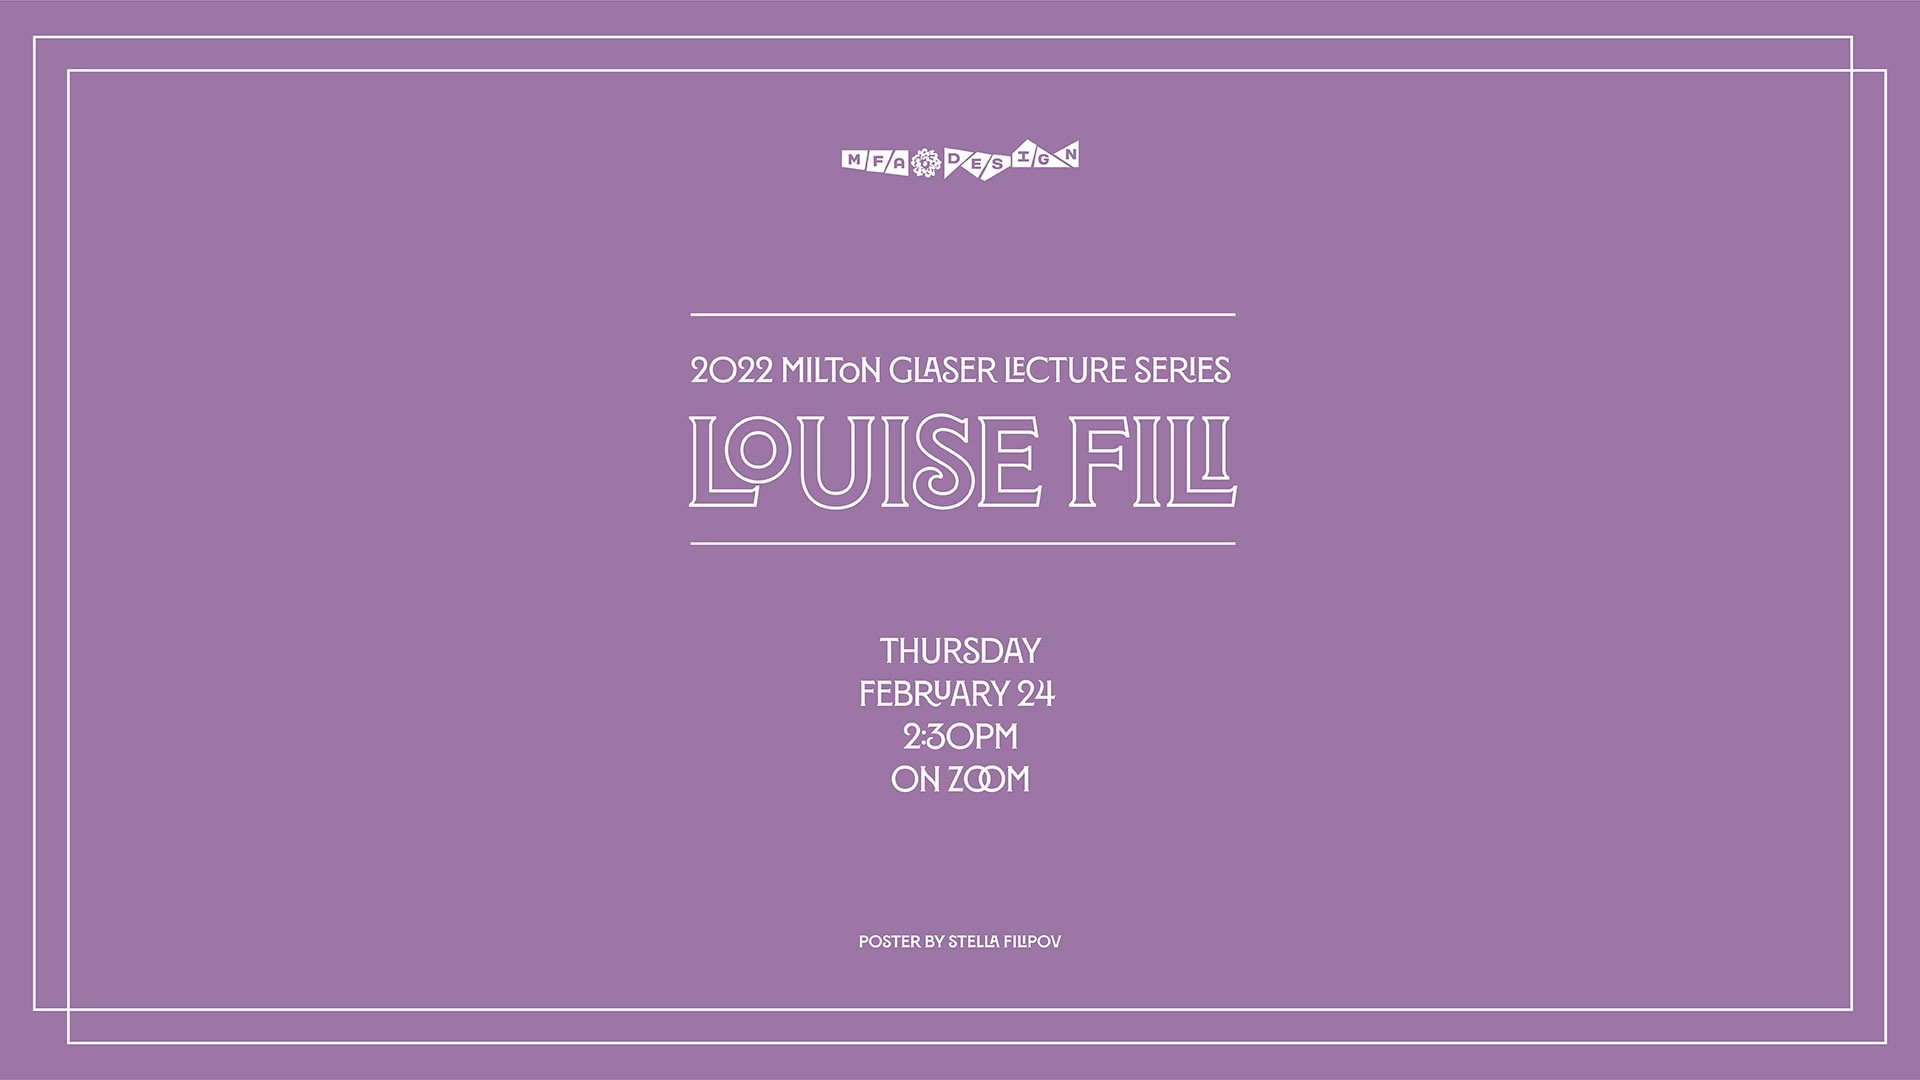 Event poster for Louise Fili, 2022 Milton Glaser Lecture Series, held on February 24 on zoom on violet background